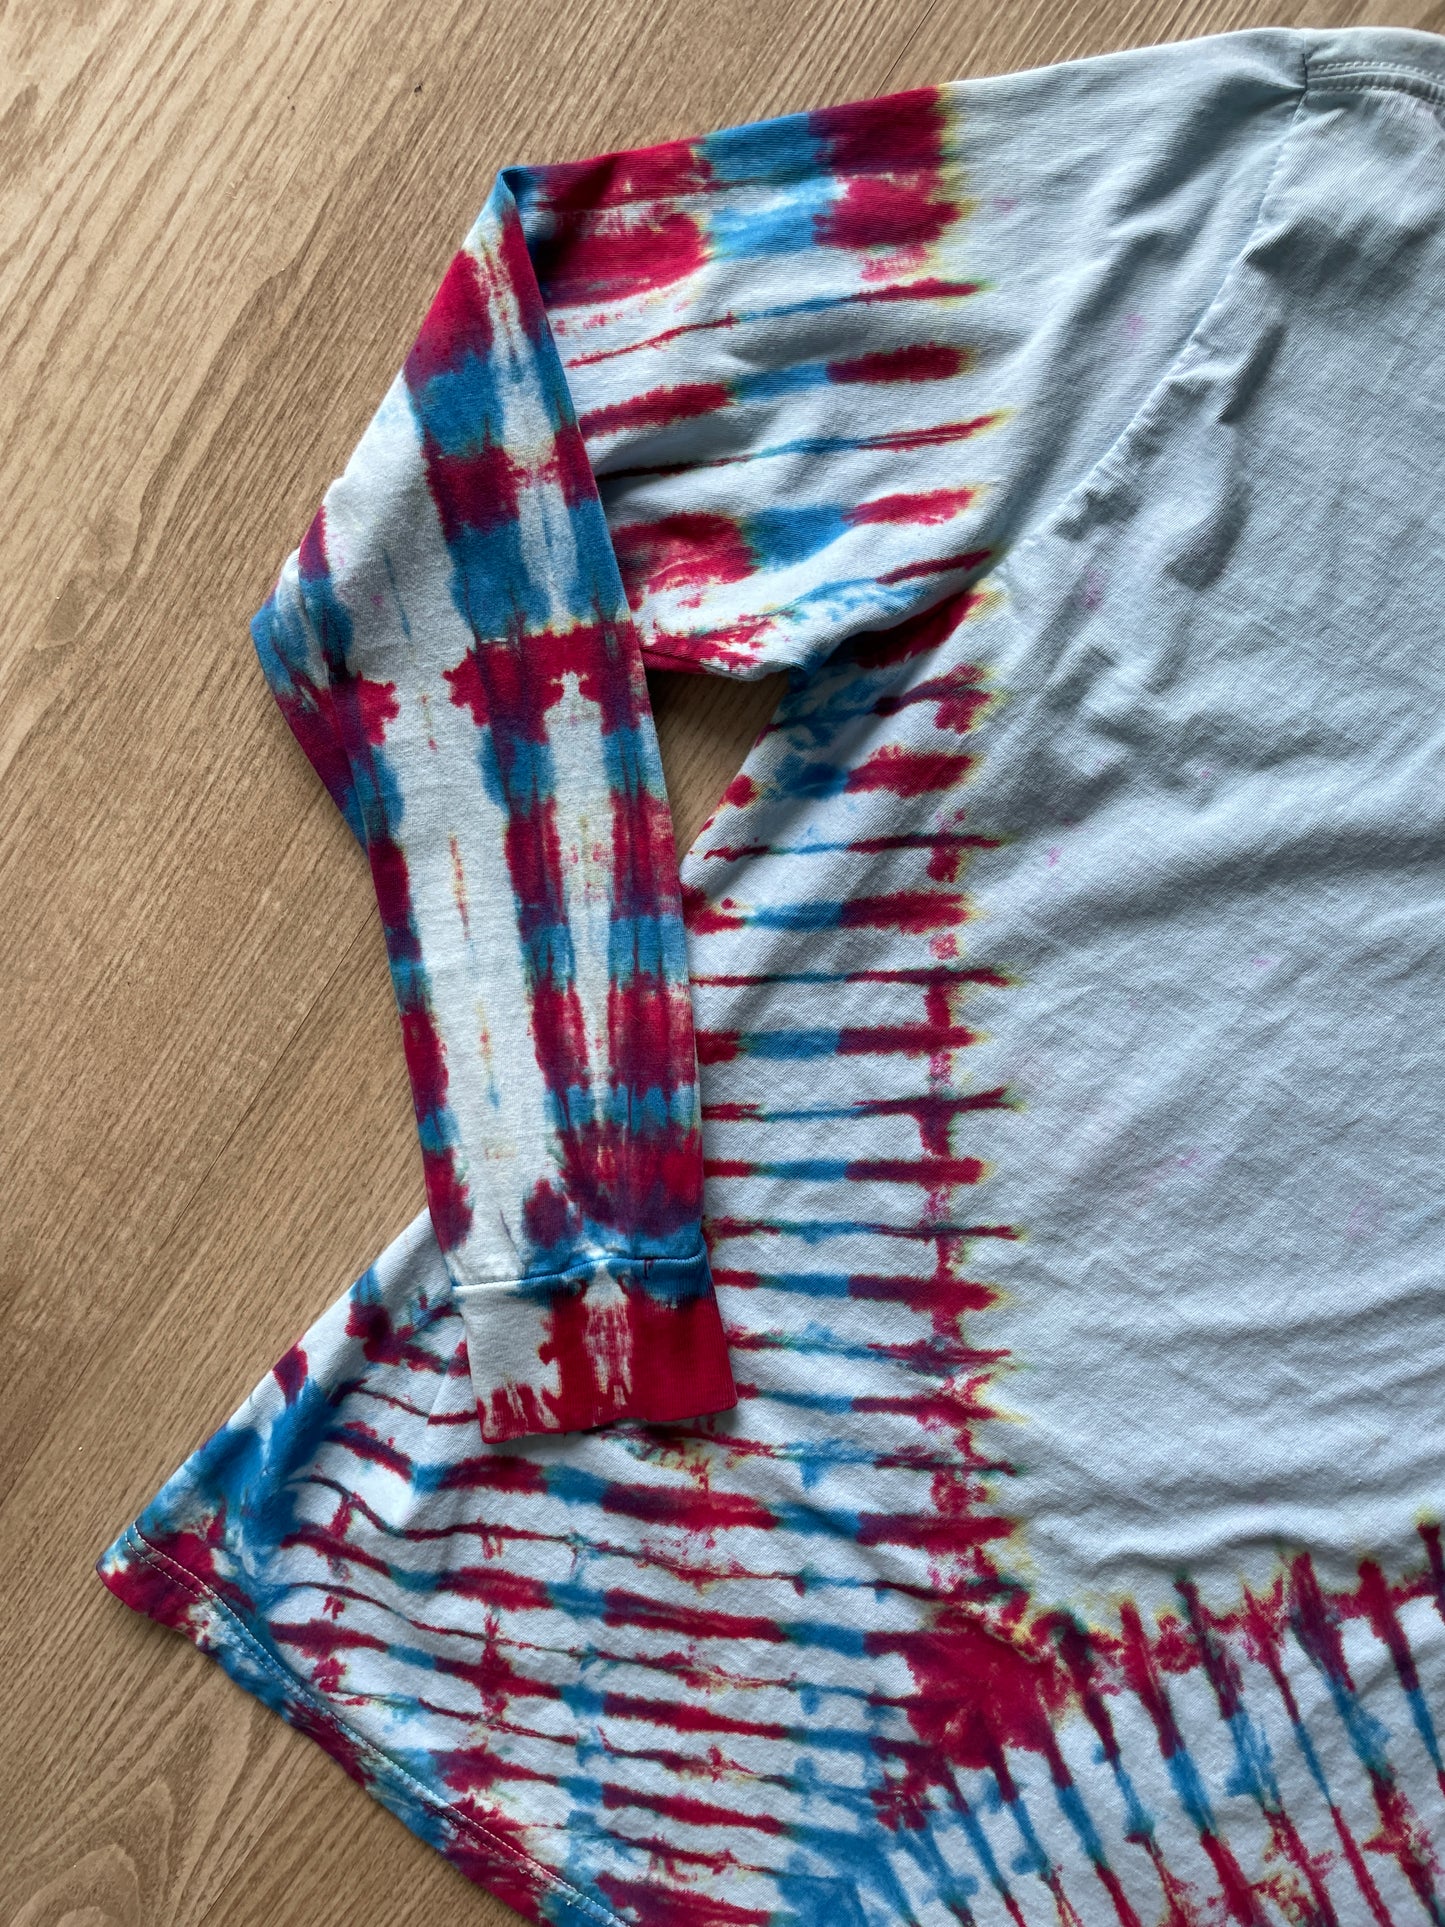 LARGE Men’s Nike Team USA Faster Higher Stronger Handmade Tie Dye T-Shirt | One-Of-a-Kind Red, White, and Blue Long Sleeve